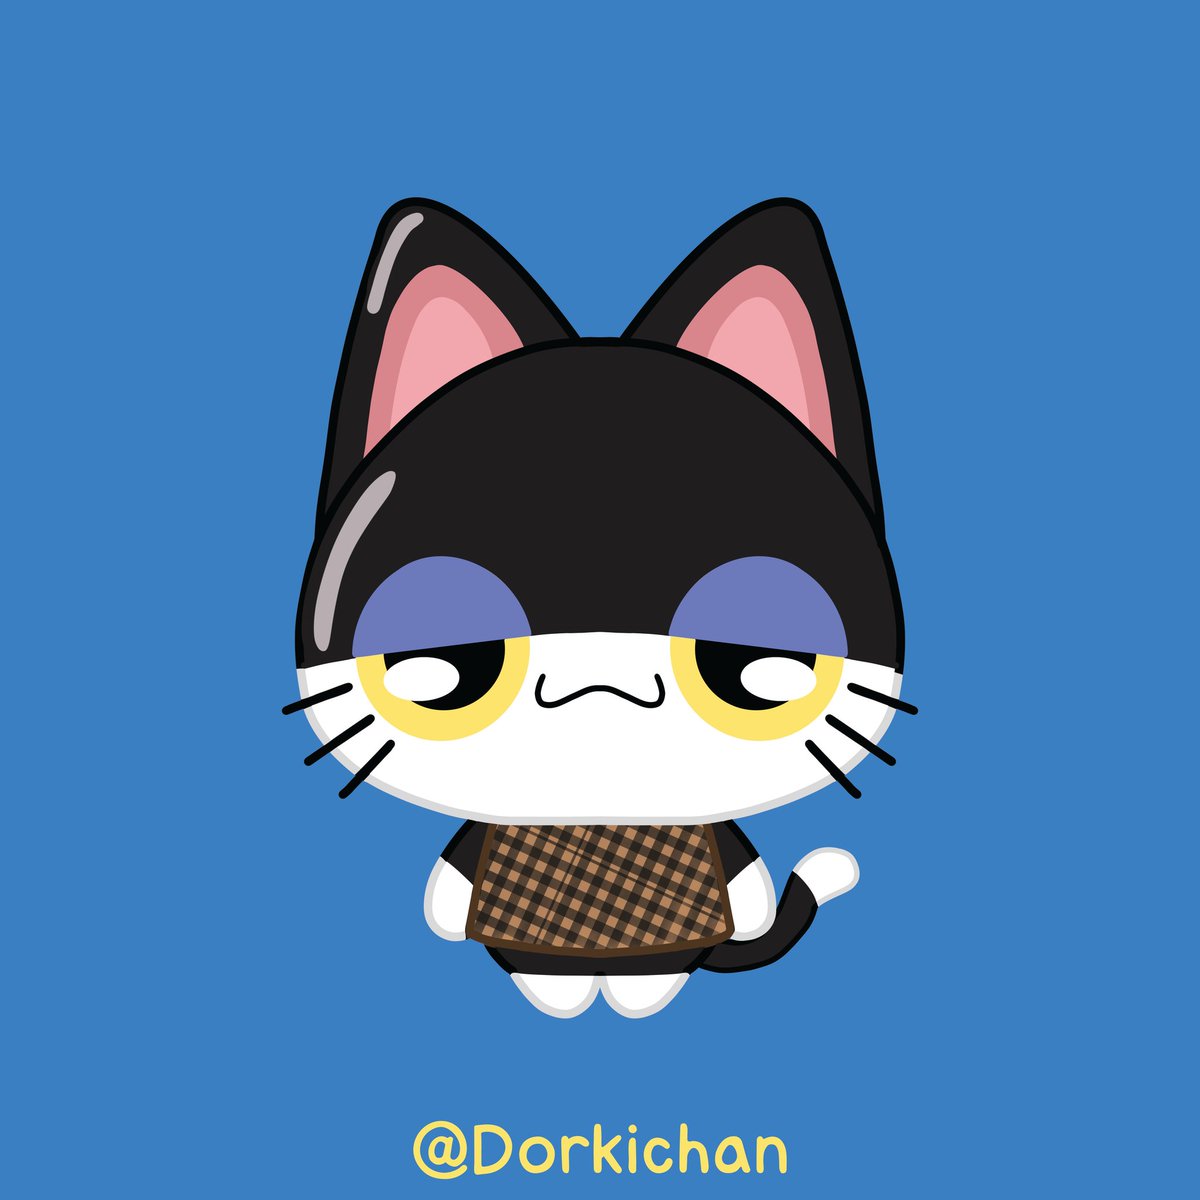 ✨ Did you know that Punchy's is Binta in Japanese ✨ 
Which means 'a slap in the face' 😬 🤣 

I mean who would dare slap this baby 😭 
#punchy #animalcrossing #acnhvillagers #dorkichan #cutearteveryday #kawaiiart #kawaiicat #catsofinstagram #cats